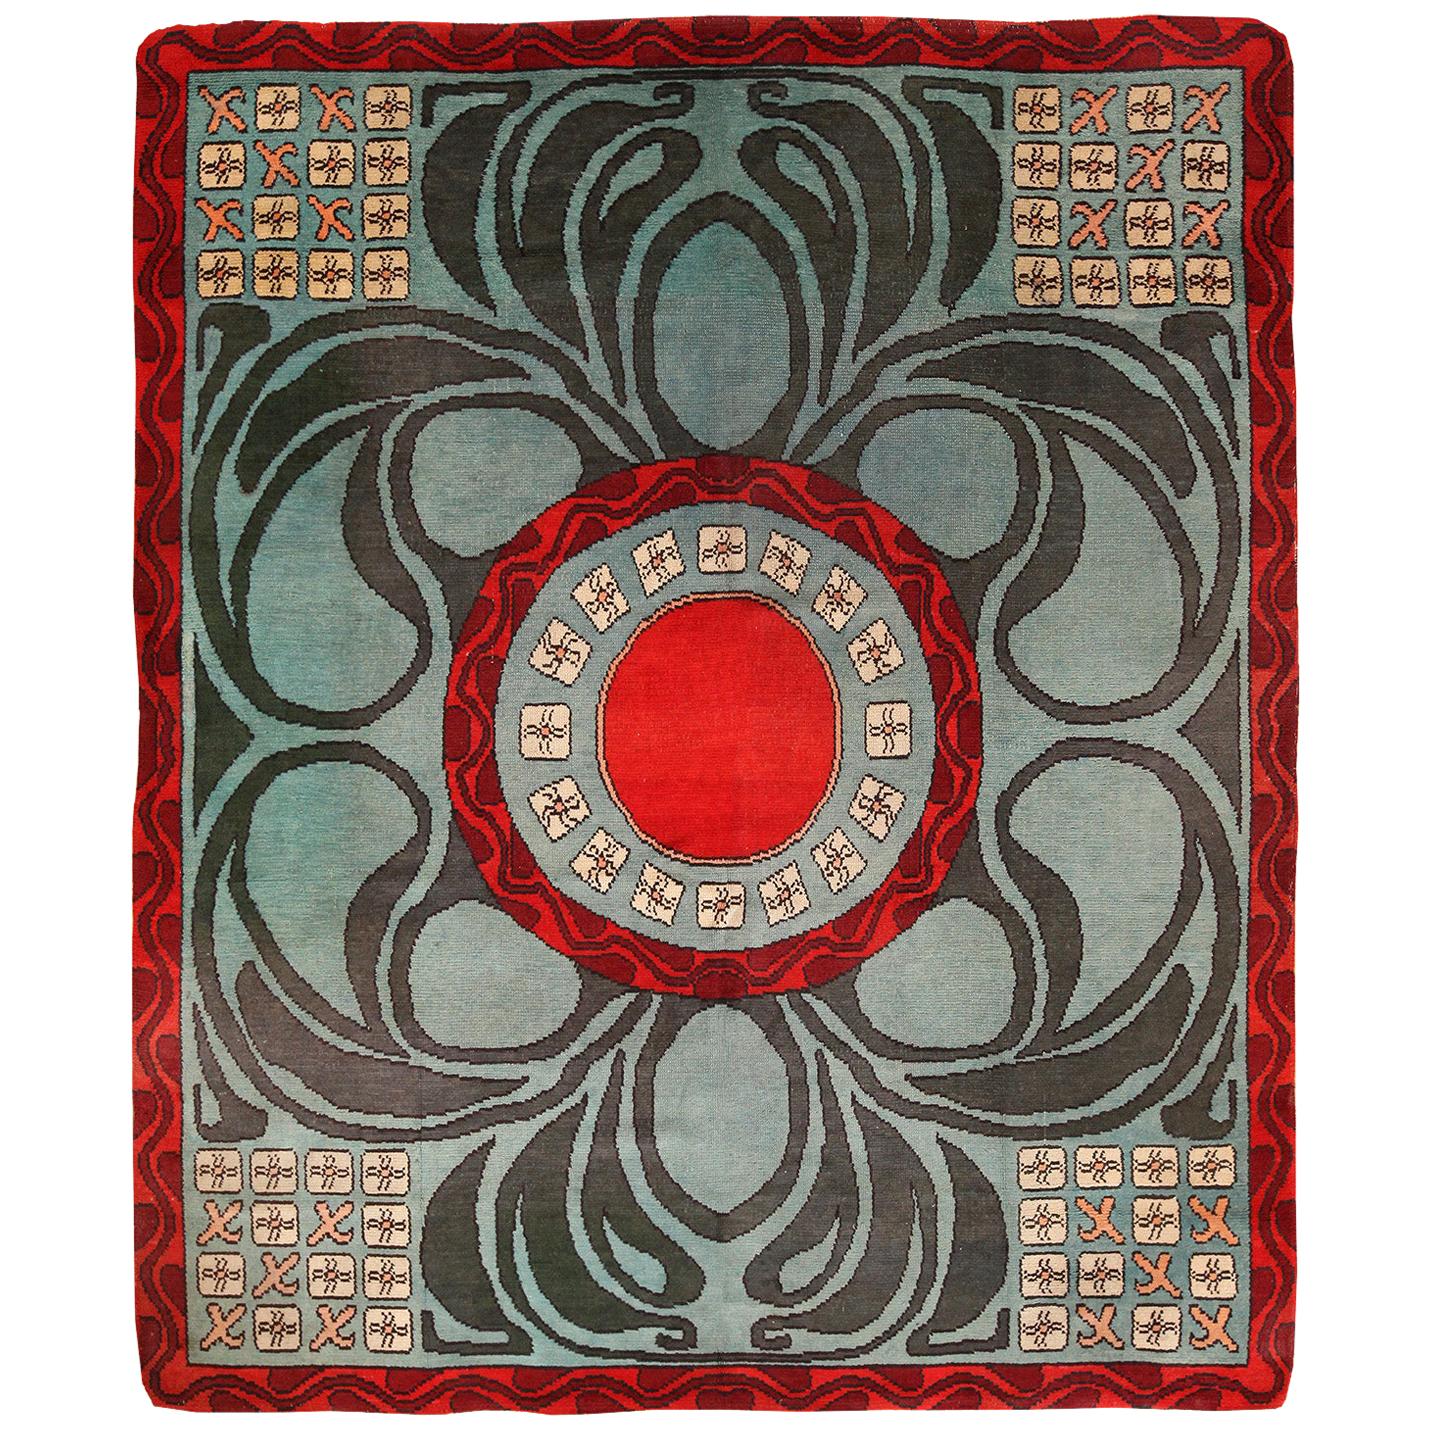 Geometric Antique French Art Deco Rug. 8 ft x 9 ft 10 in